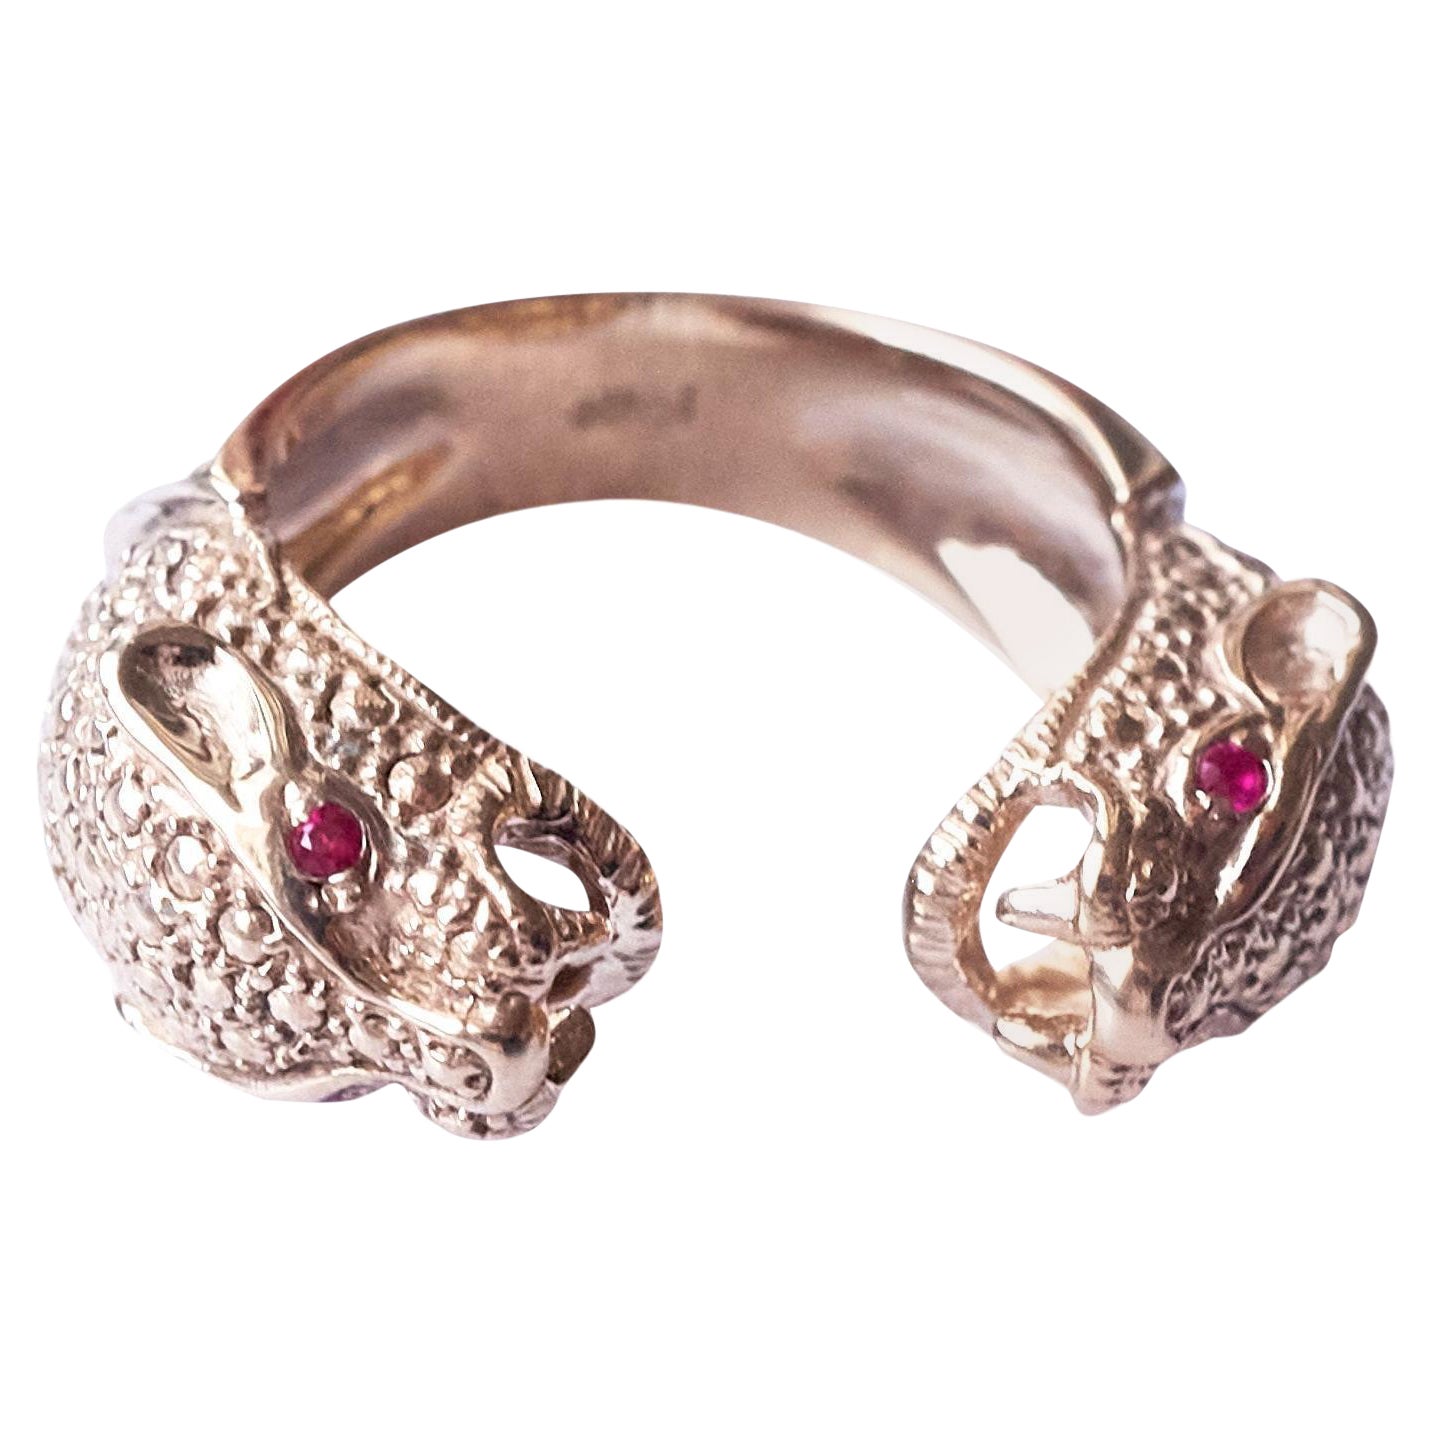 Ruby Jaguar Ring Animal Ring Cocktail Ring Bronze J Dauphin

Made in Los Angeles

This Ring is tiny adjustable on the finger between sizes 6-8
Can be made in Gold or Silver

Available for immediate delivery, 